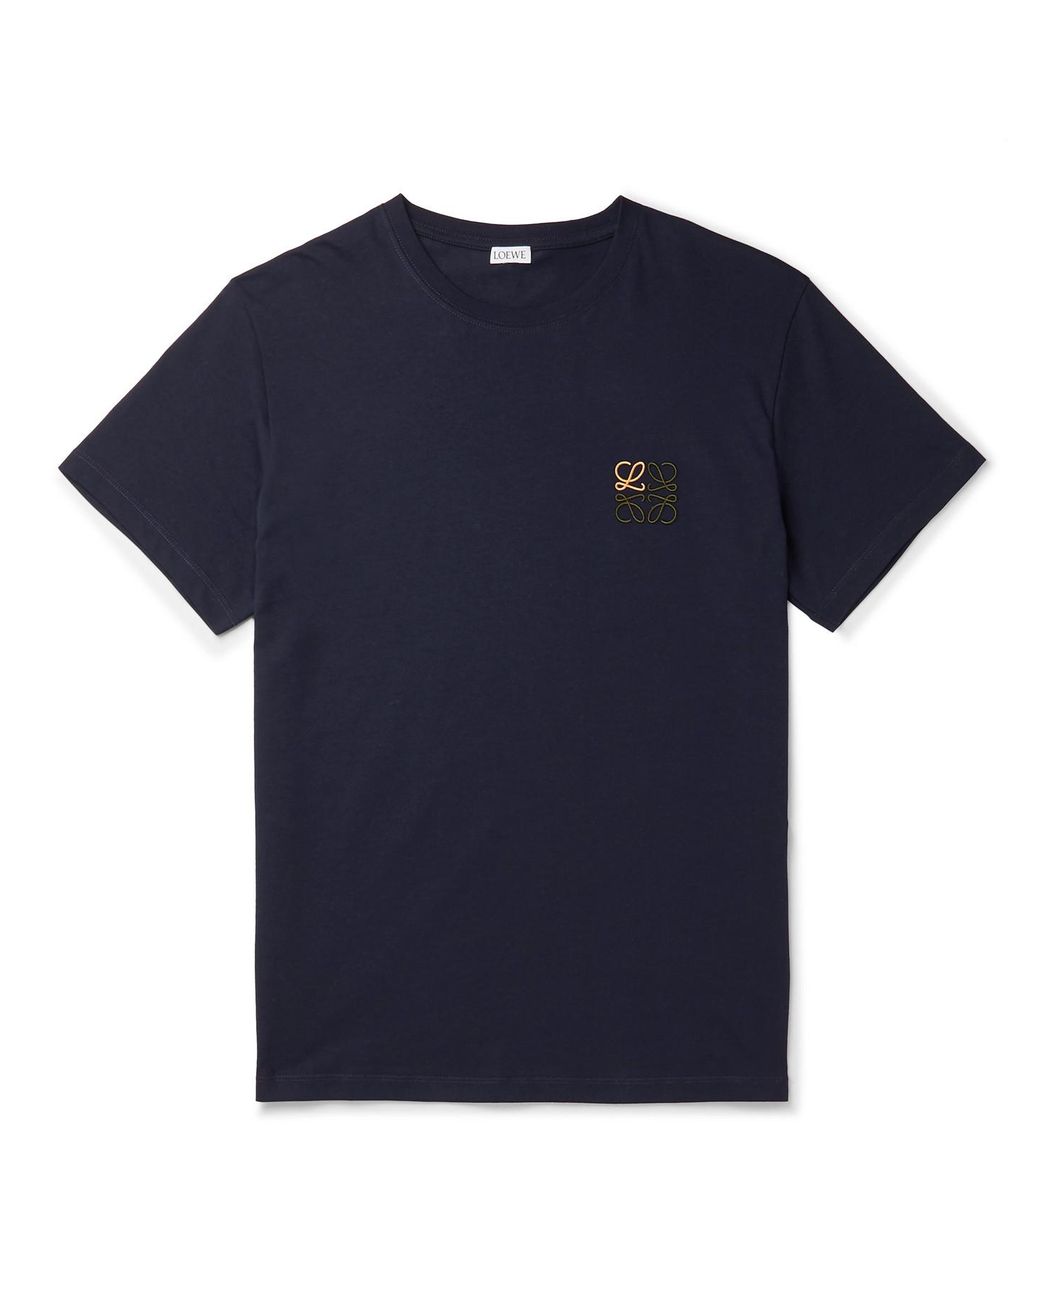 Loewe Logo-embroidered Cotton-jersey T-shirt in Blue for Men - Lyst